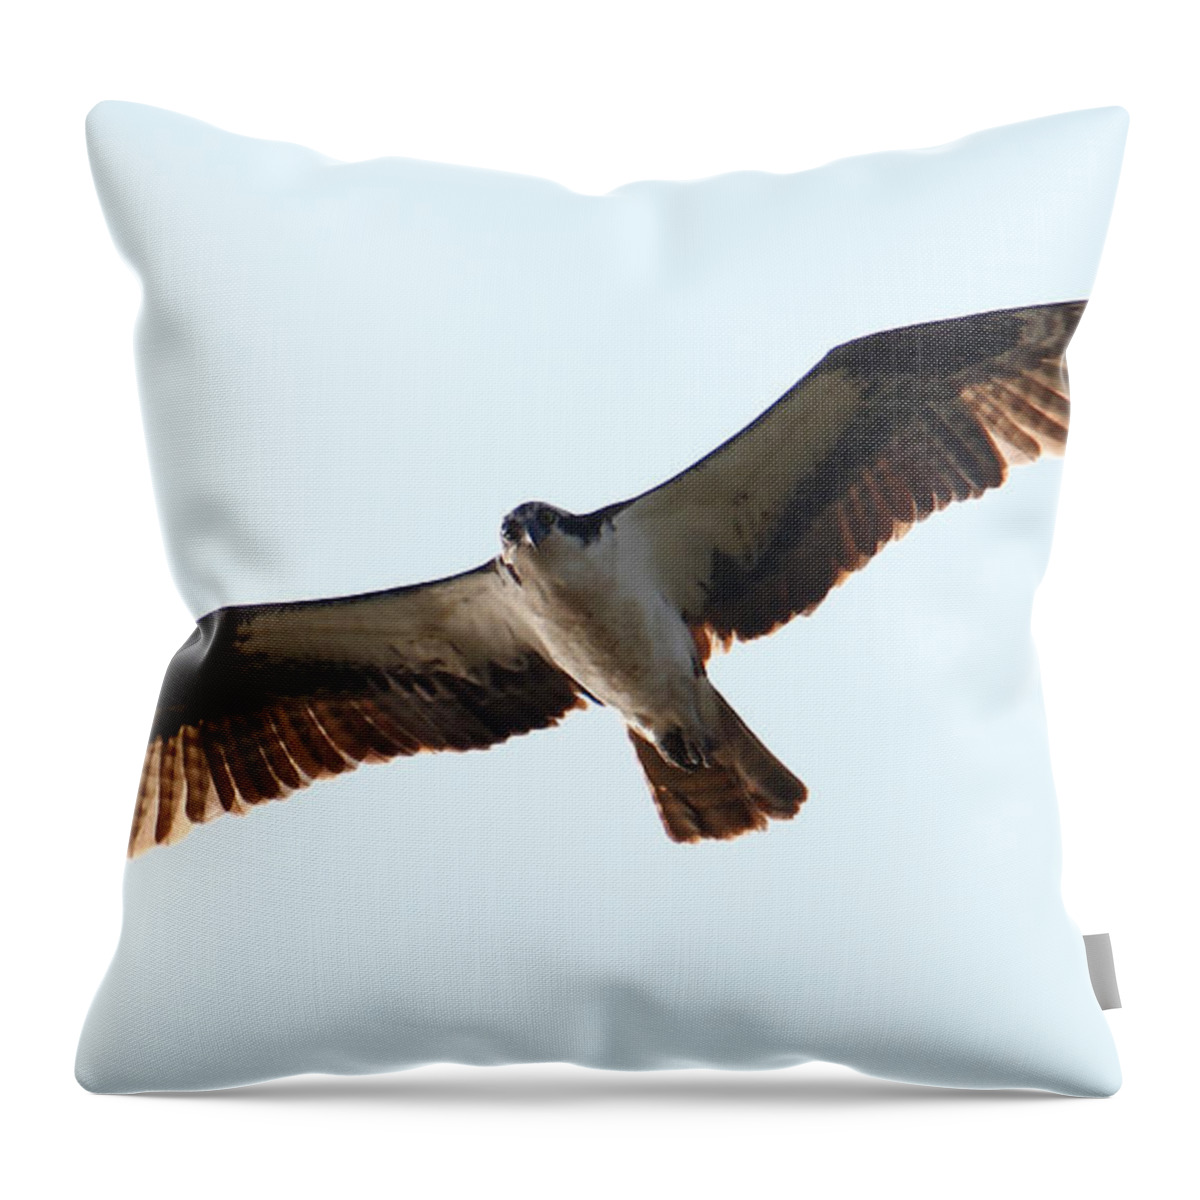 Osprey Throw Pillow featuring the photograph Being Stared Down by the Osprey by Tony Lee